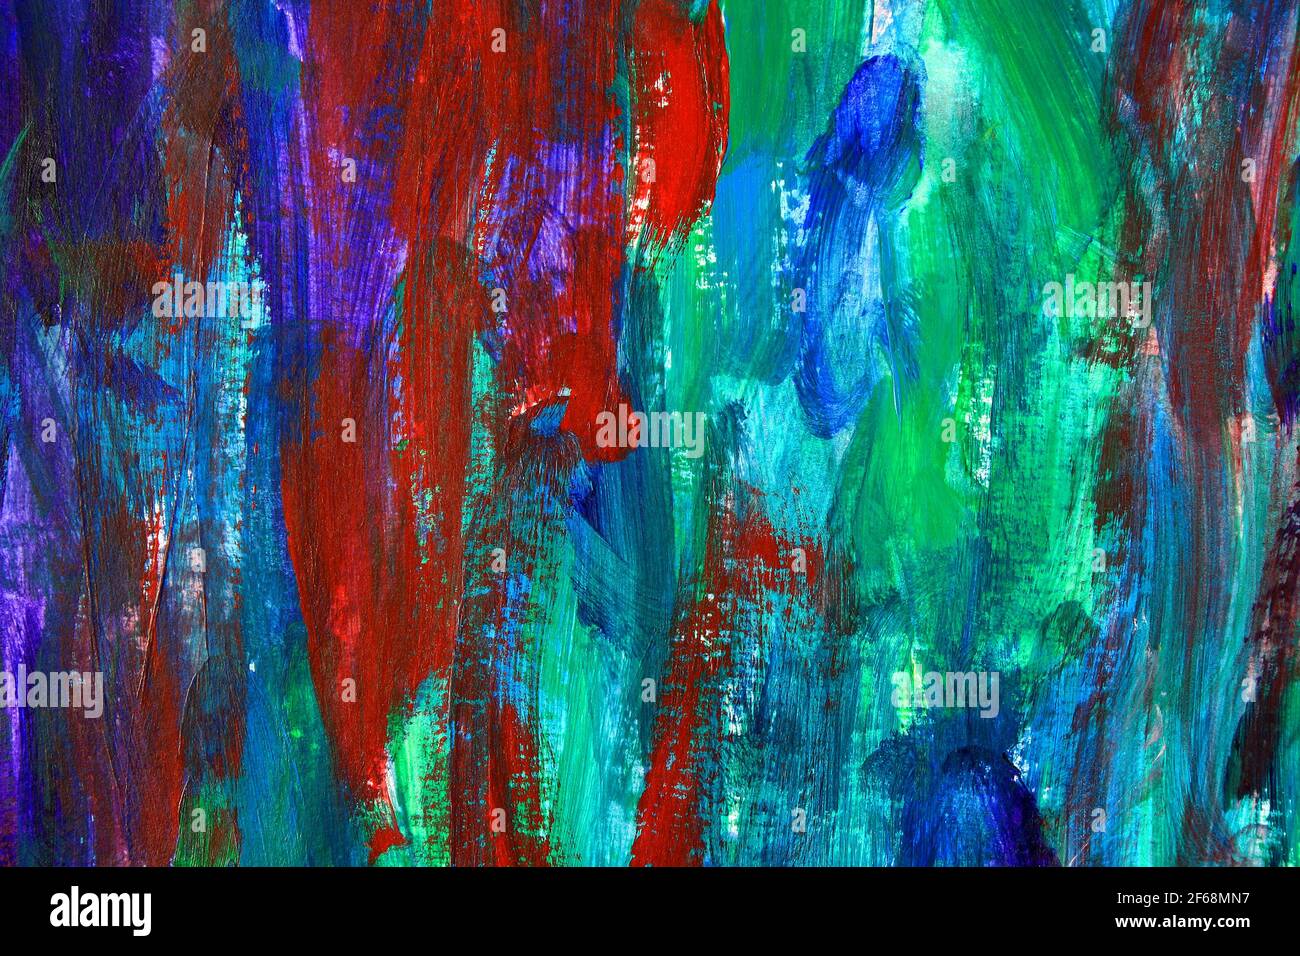 Close-up image of an abstract painting in red, green and blue colours Stock Photo